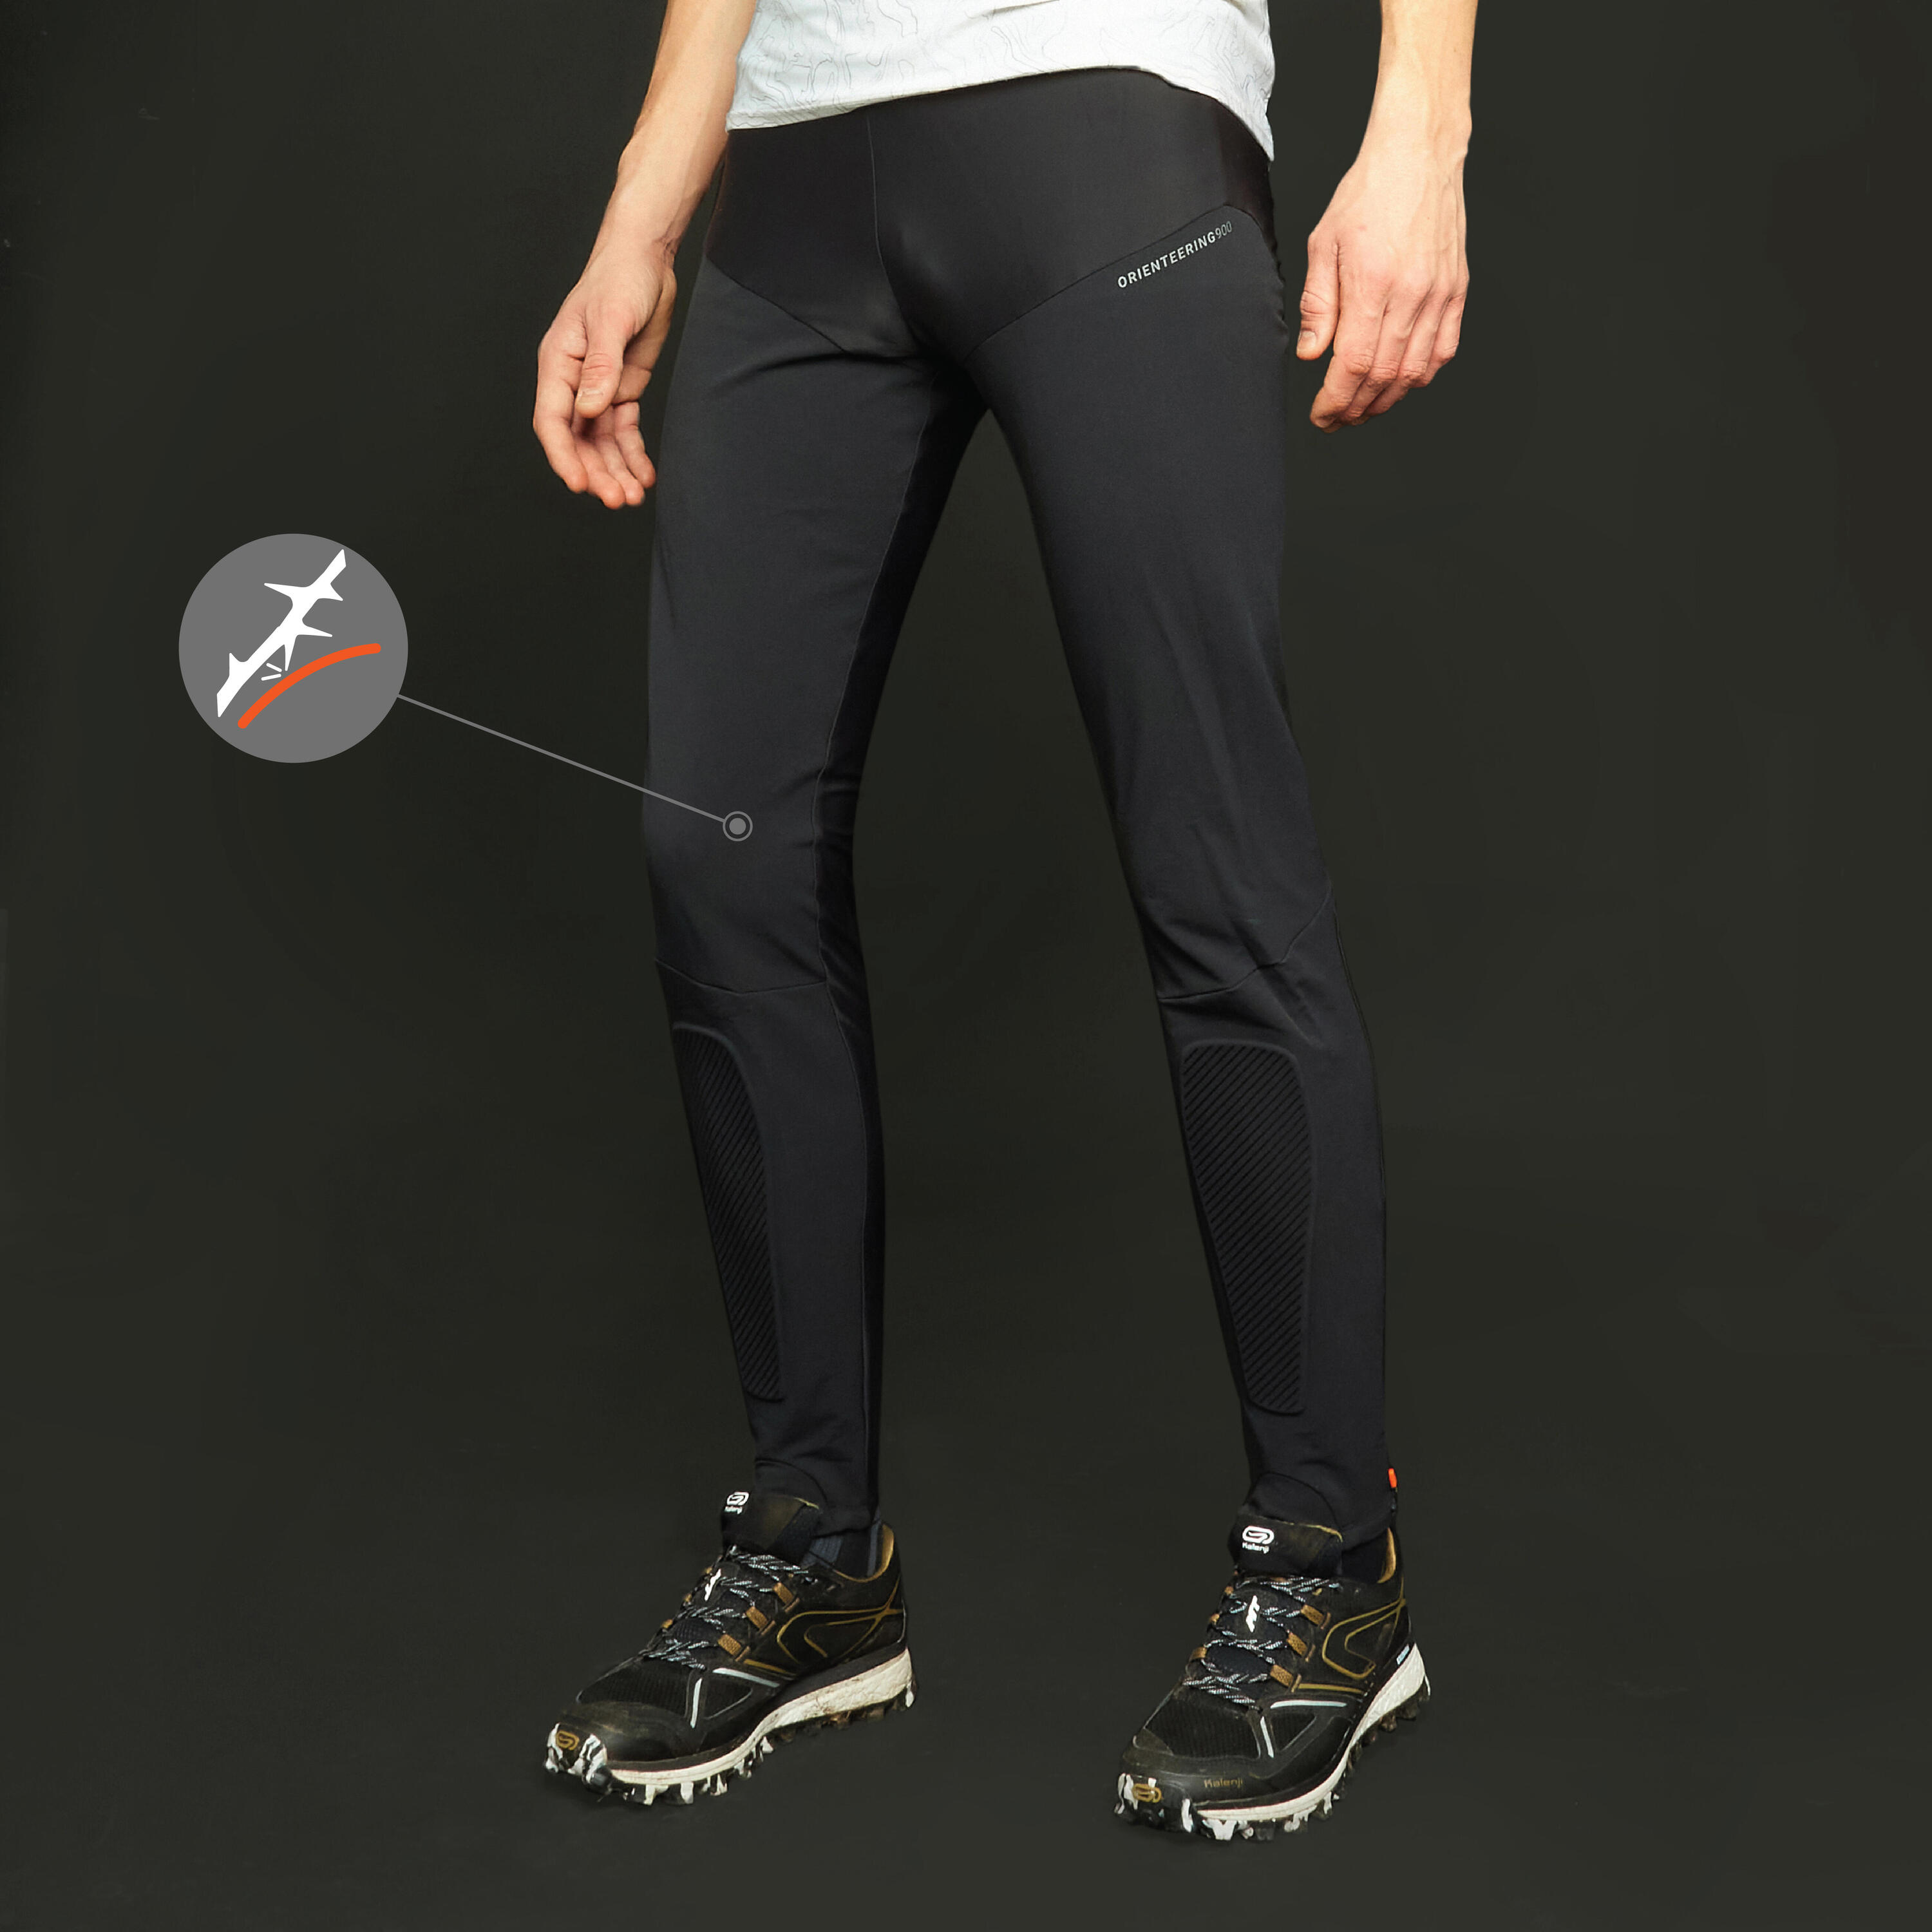 Compression Leggings Decathlon Uk  International Society of Precision  Agriculture